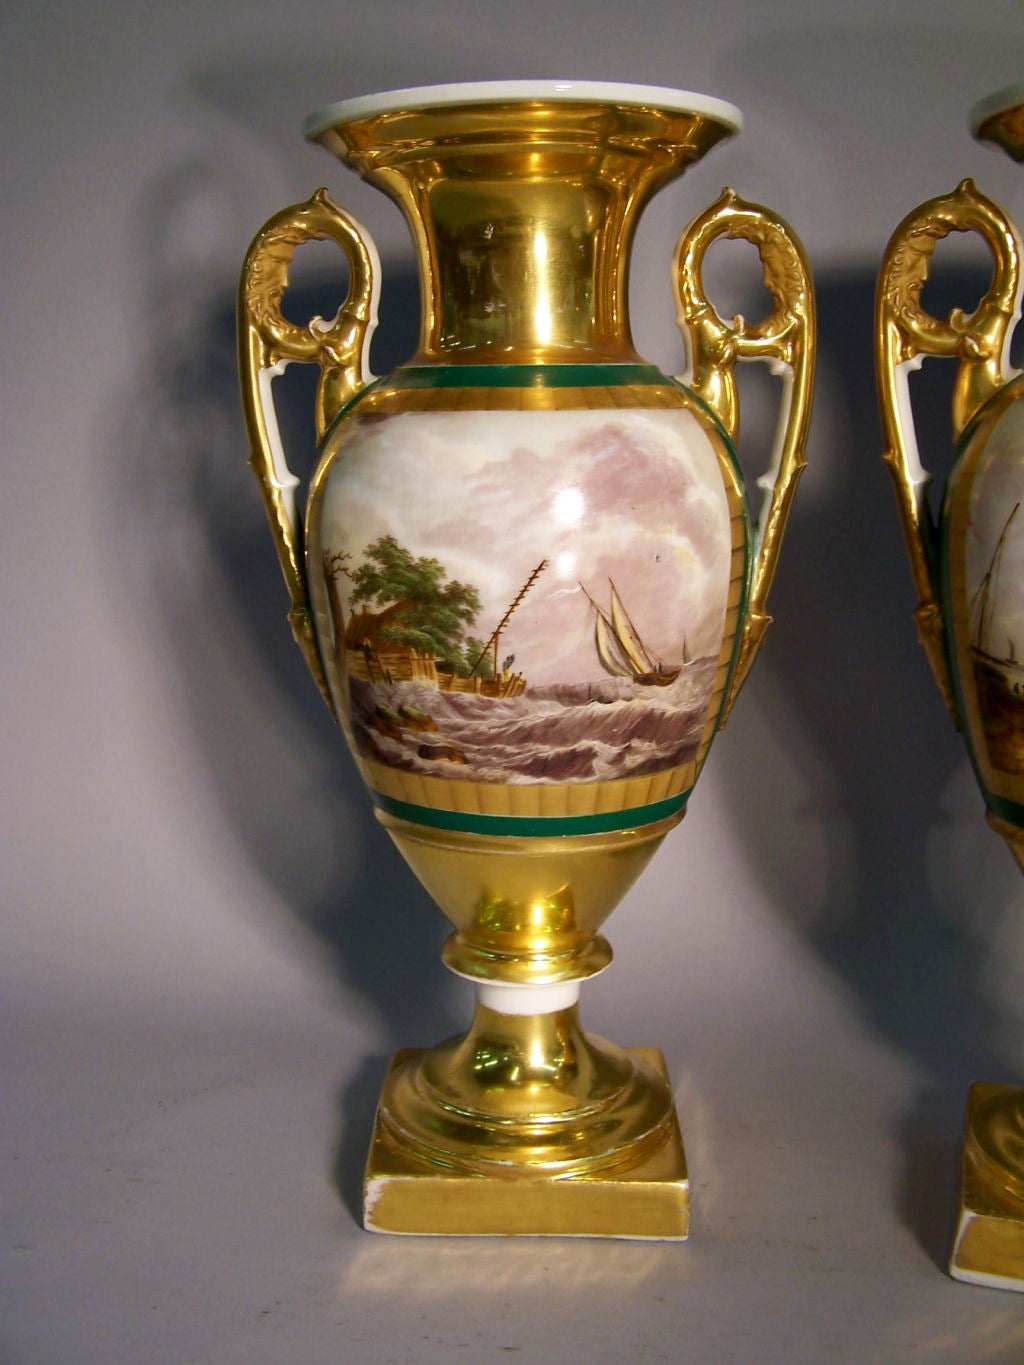 A fine pair of Paris porcelain vases on pedestal bases, featuring landscape scenes within acid-etched gilt borders. The body of each vase with a green ground, above and below with gilt ground. Each vase flanked by scrolled handles in gilt, with a